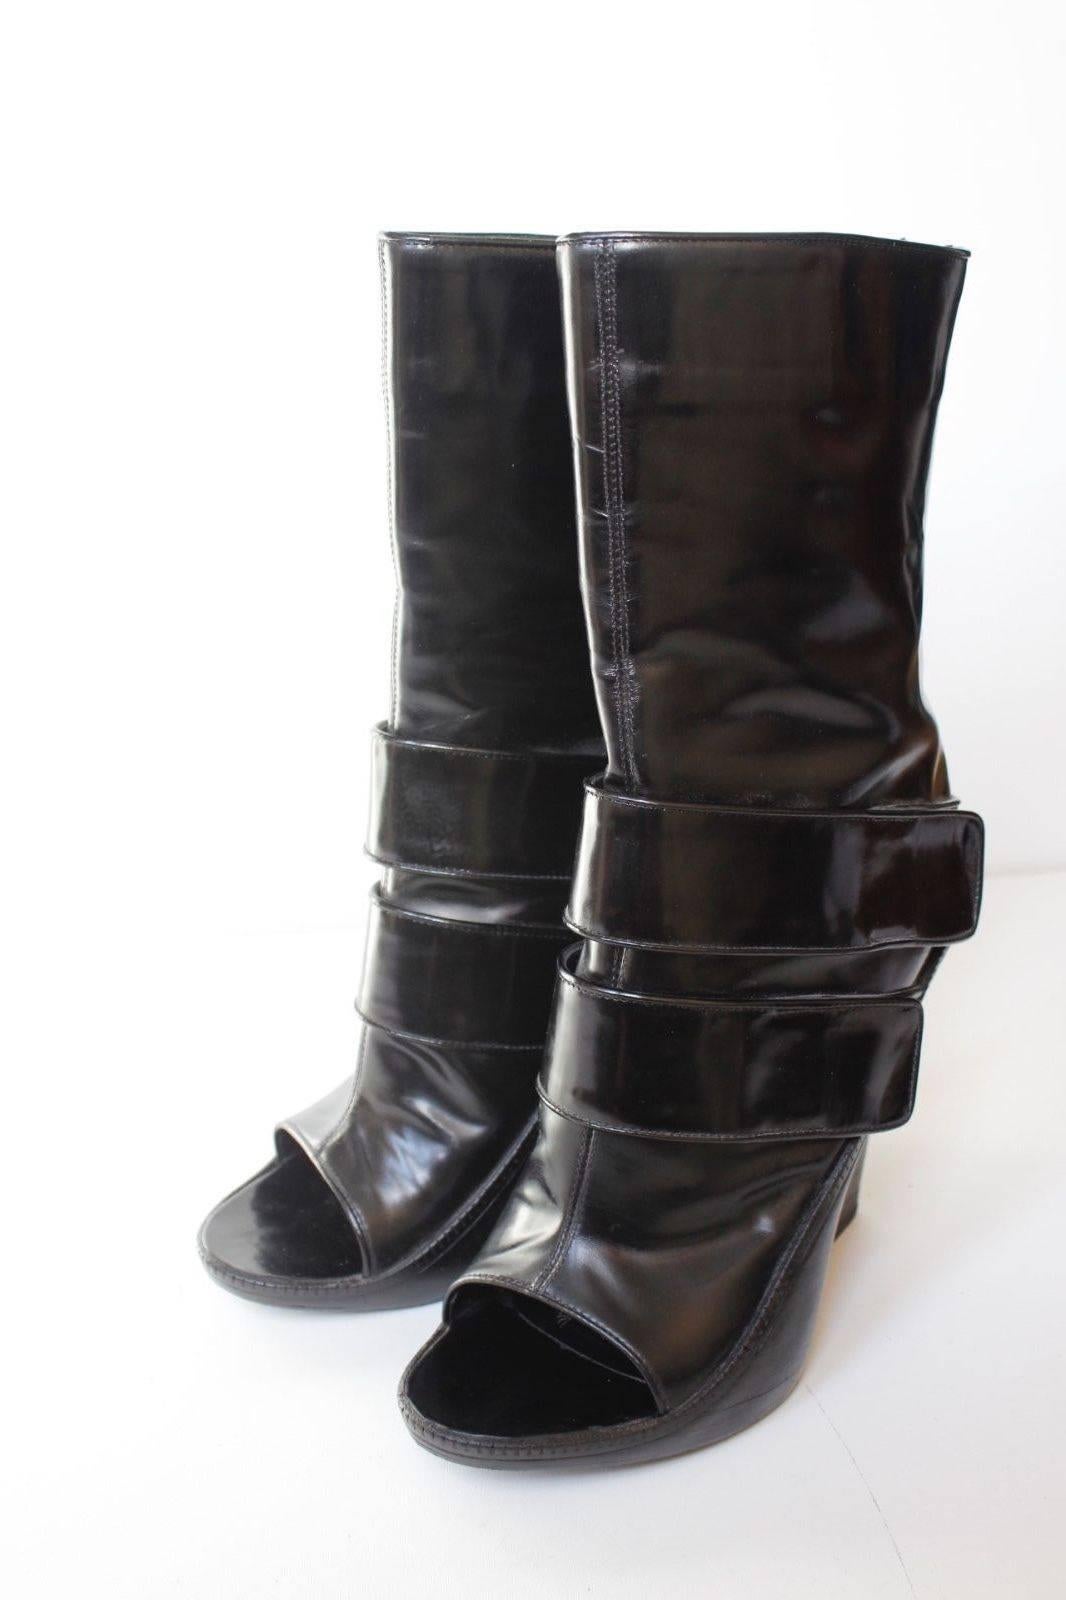 Givenchy Black Patent Leather Wedge Midi Boots 40.5 uk 7.5
Black patent leather Givenchy peep-toe wedge boots with dual strap accents at top lines, stacked heels and zip closures at shafts. 
5.5 inch wooden wedge heel 
Excellent condition
